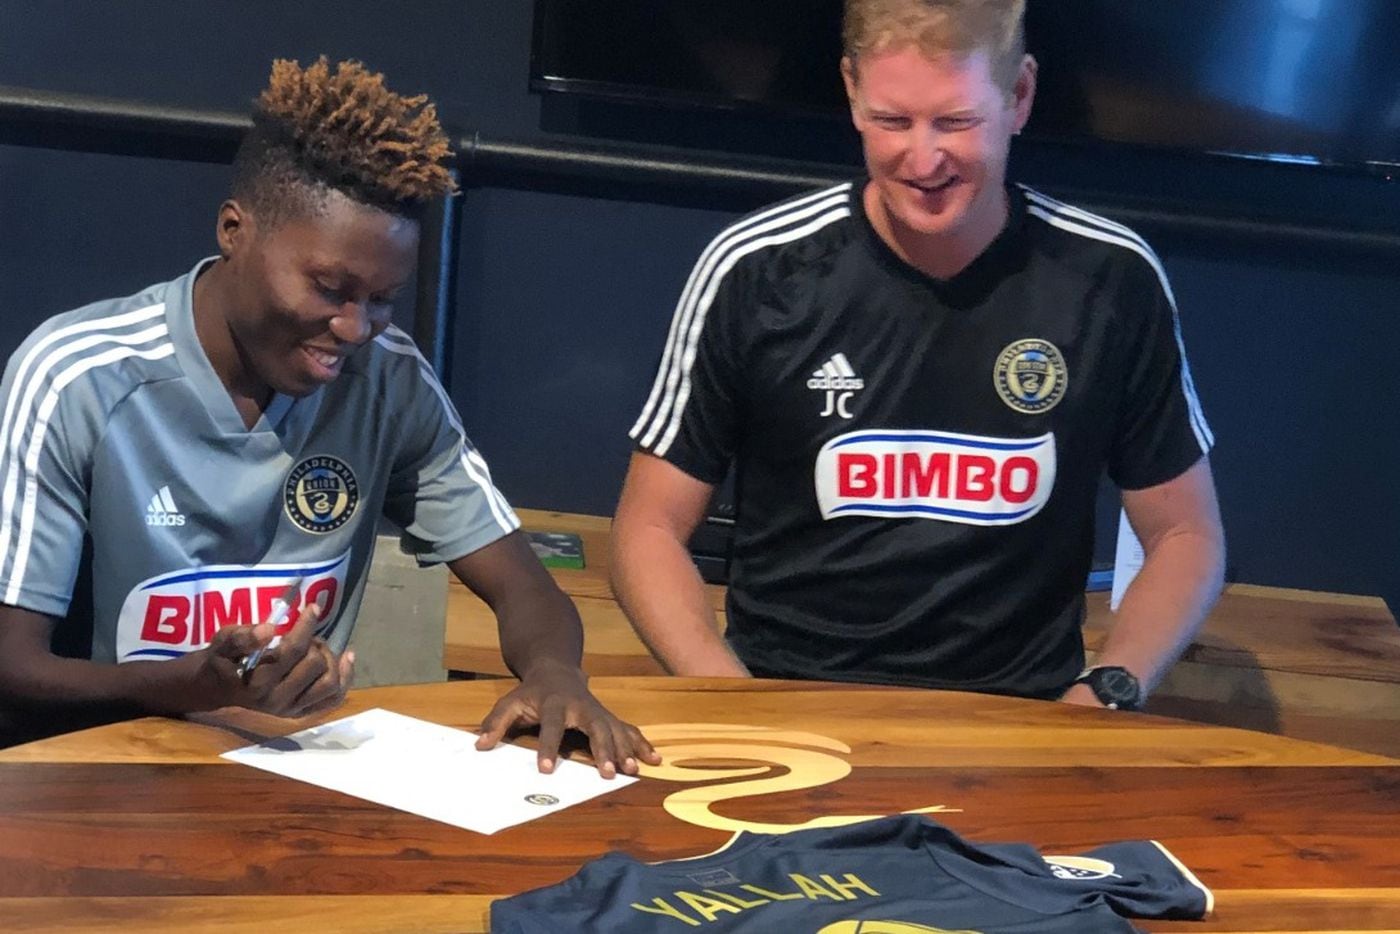 Daniel Yallah signs a one-day contract with the Philadelphia Union to play with the team on Sept. 21. Head coach Jim Curtin looks on.